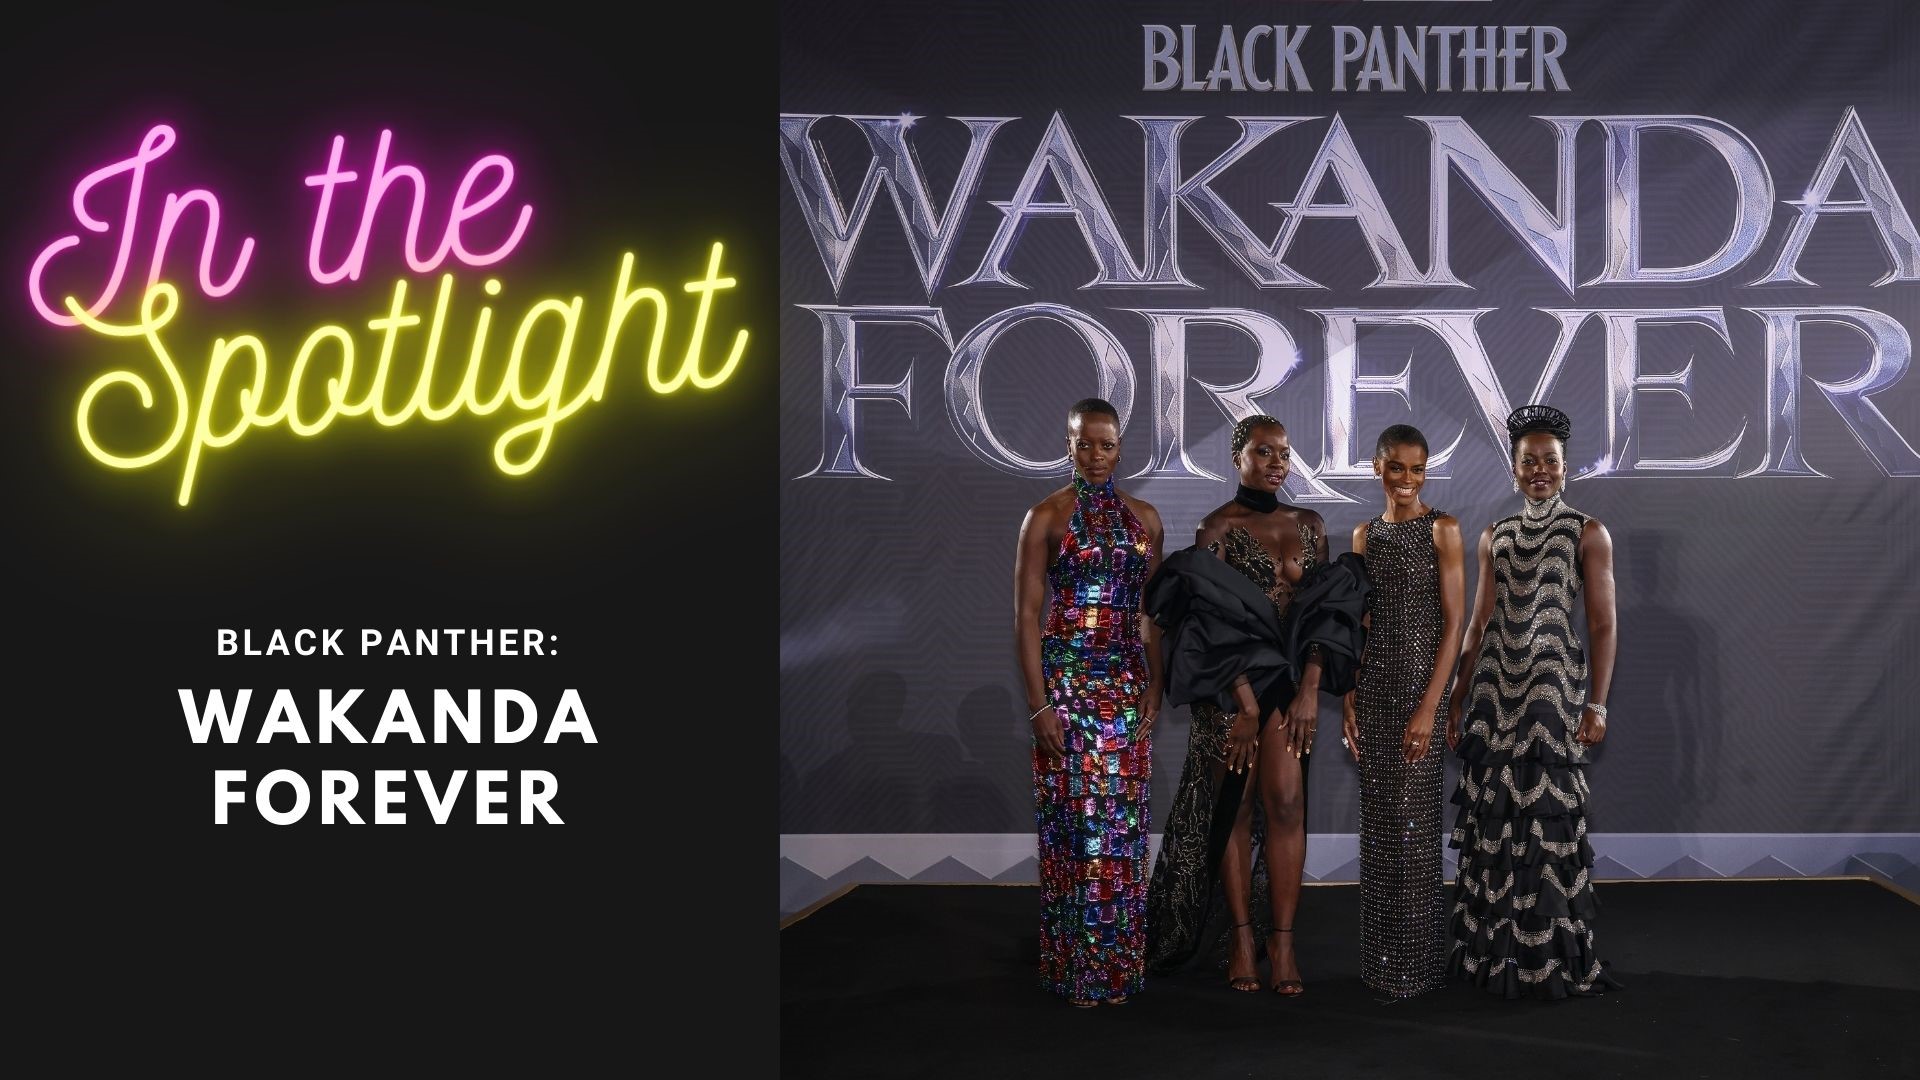 As 'Black Panther: Wakanda Forever' hits theaters, we take a look at how the stars are reacting plus what went into making the film without Chadwick Boseman.